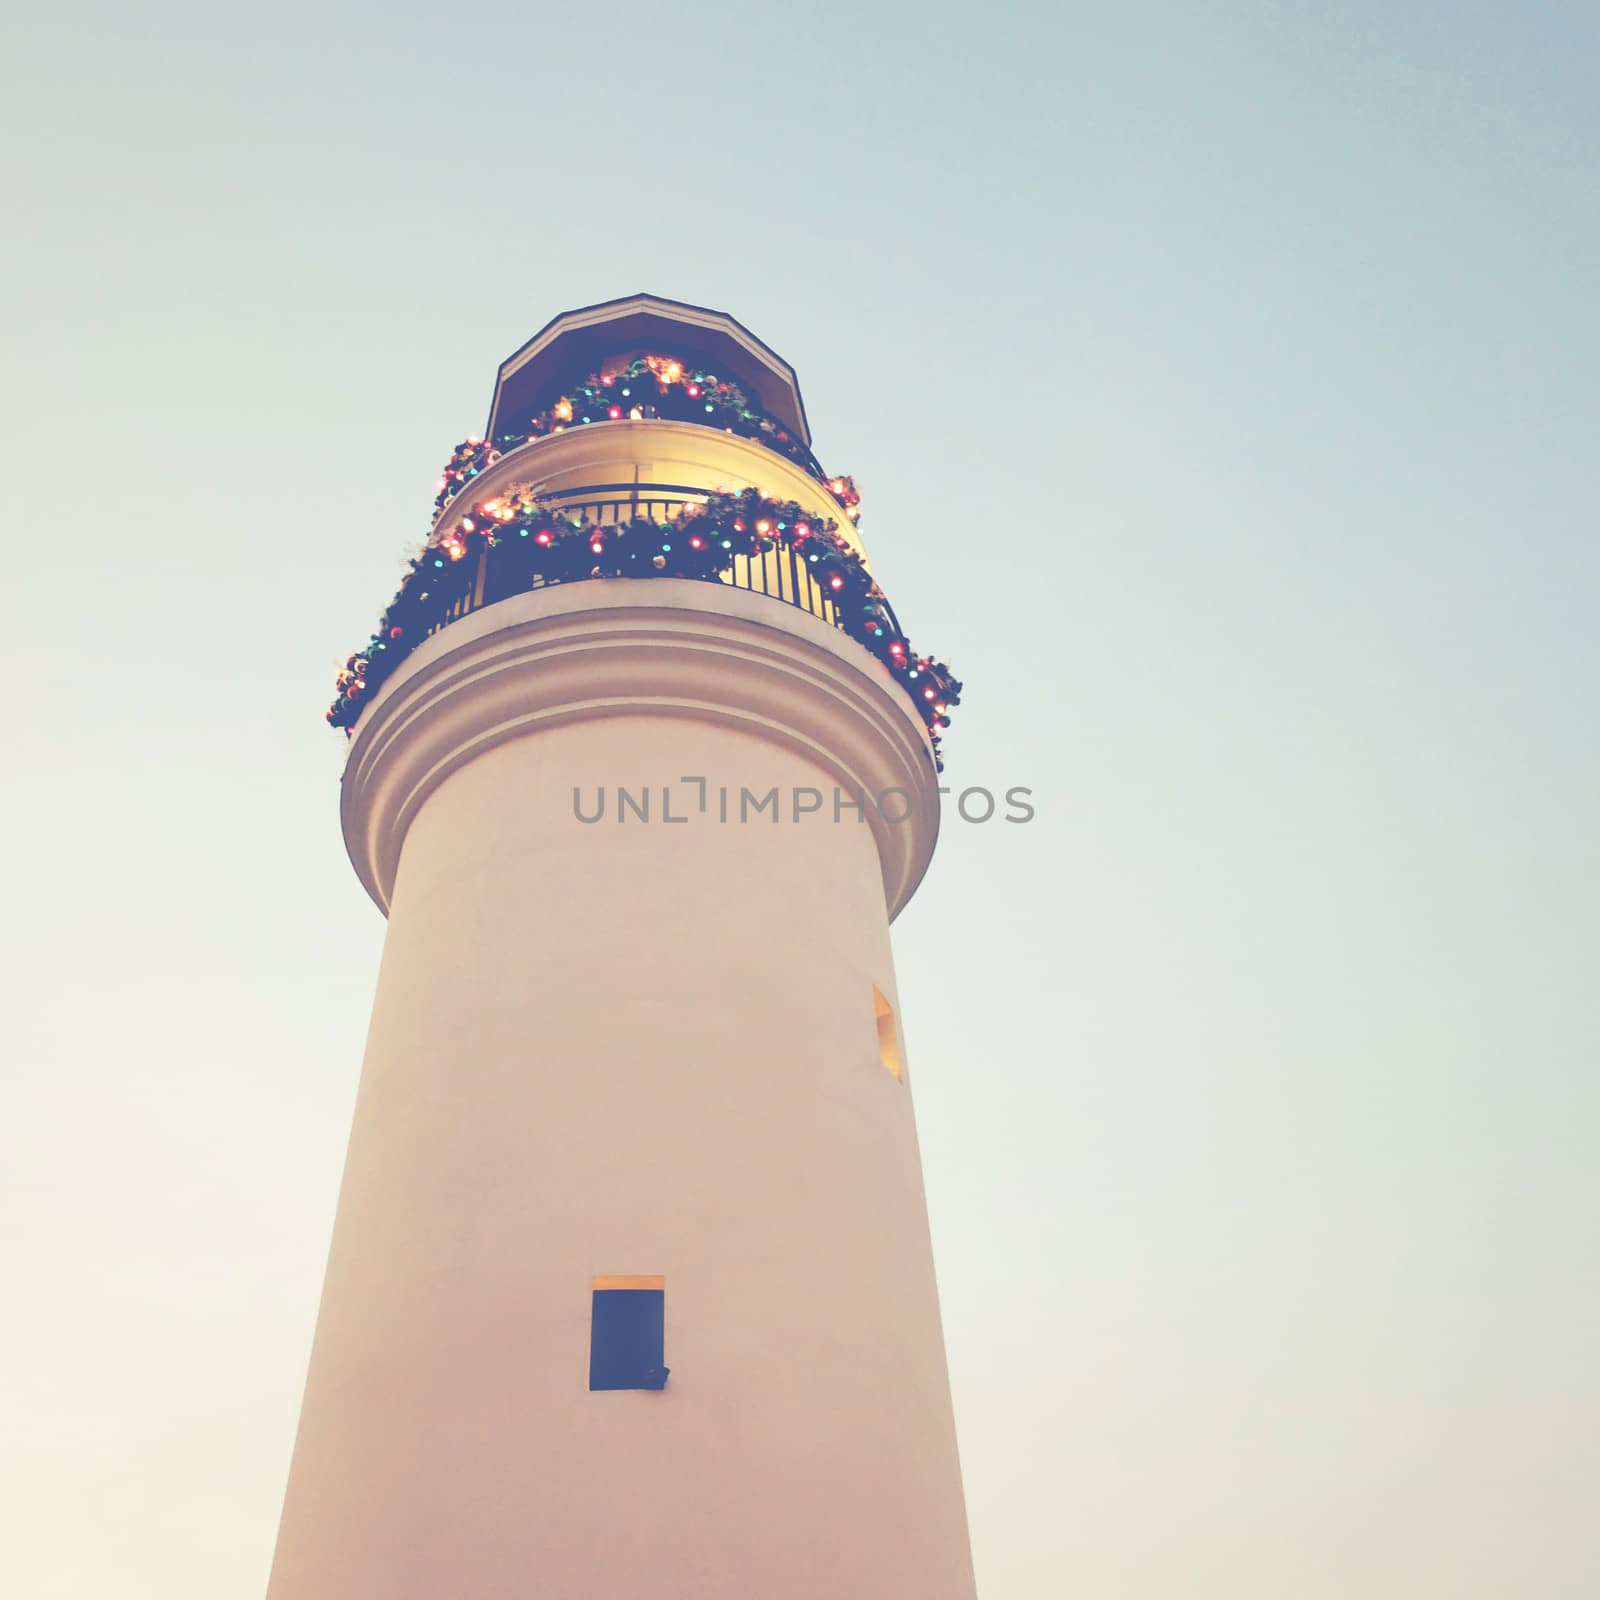 Lighthouse with christmas ornaments, retro filter effect 